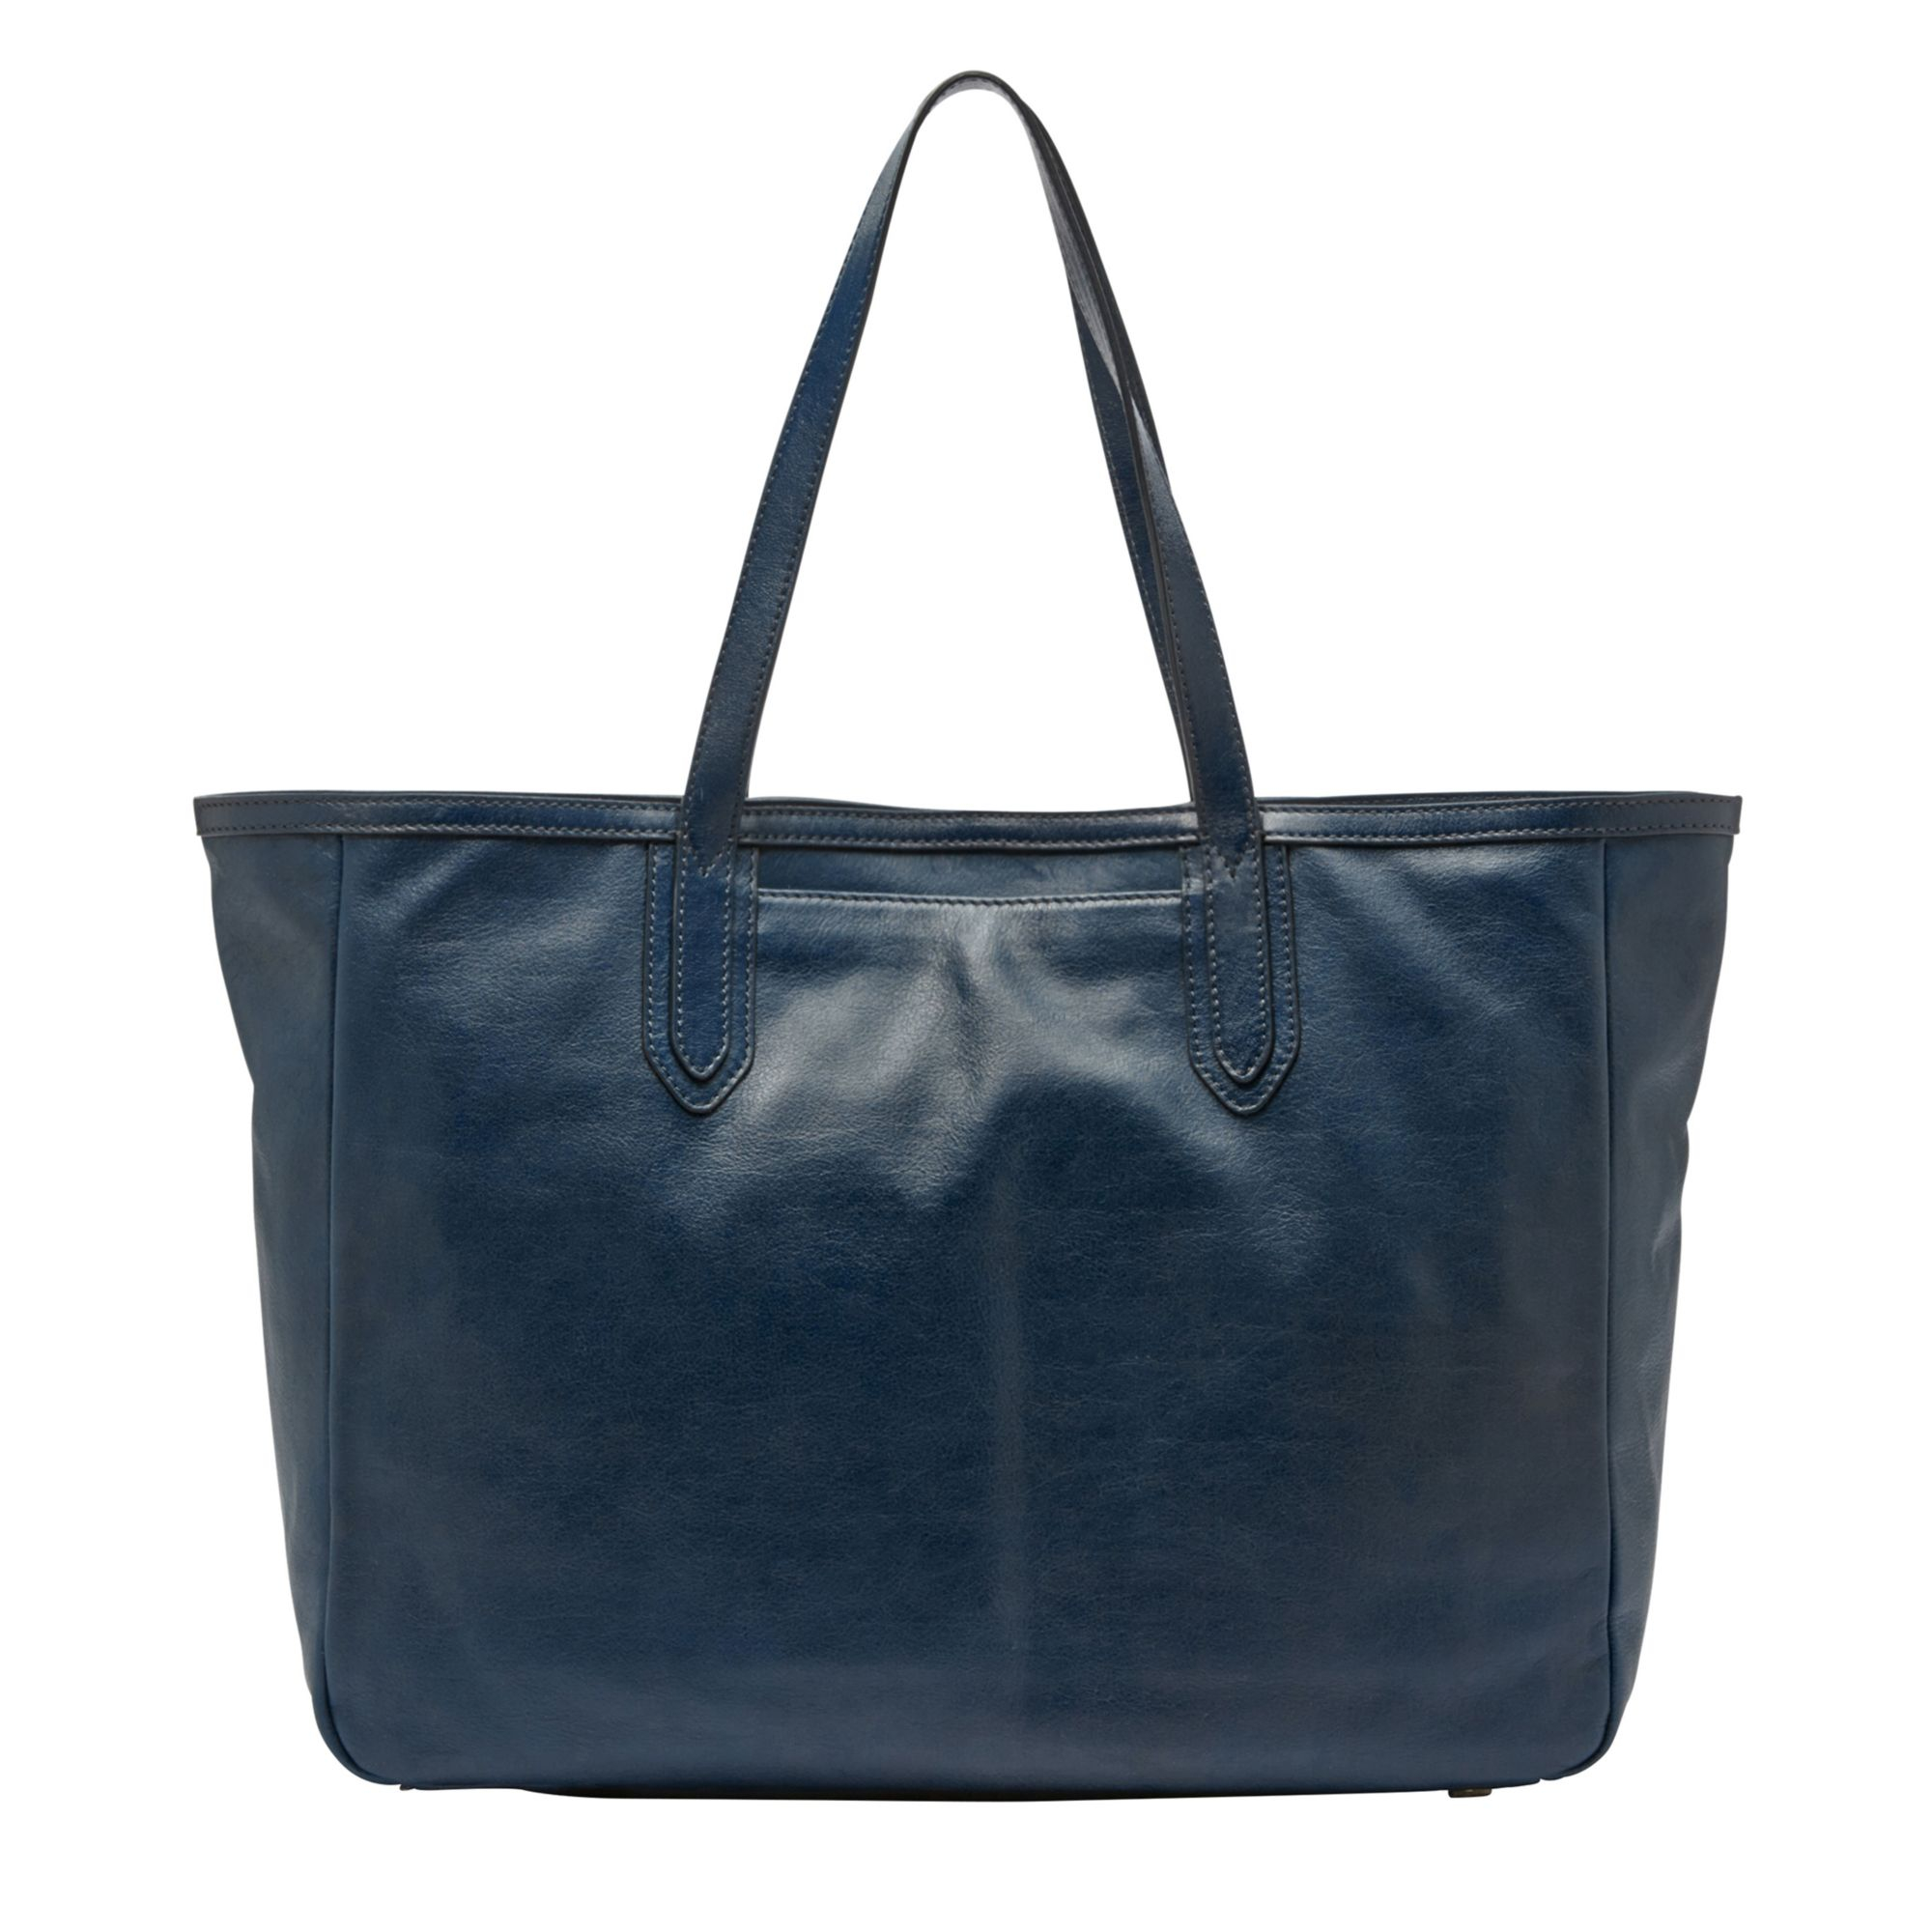 Fossil Sydney Leather Tote in Blue (HERITAGE BLUE) | Lyst